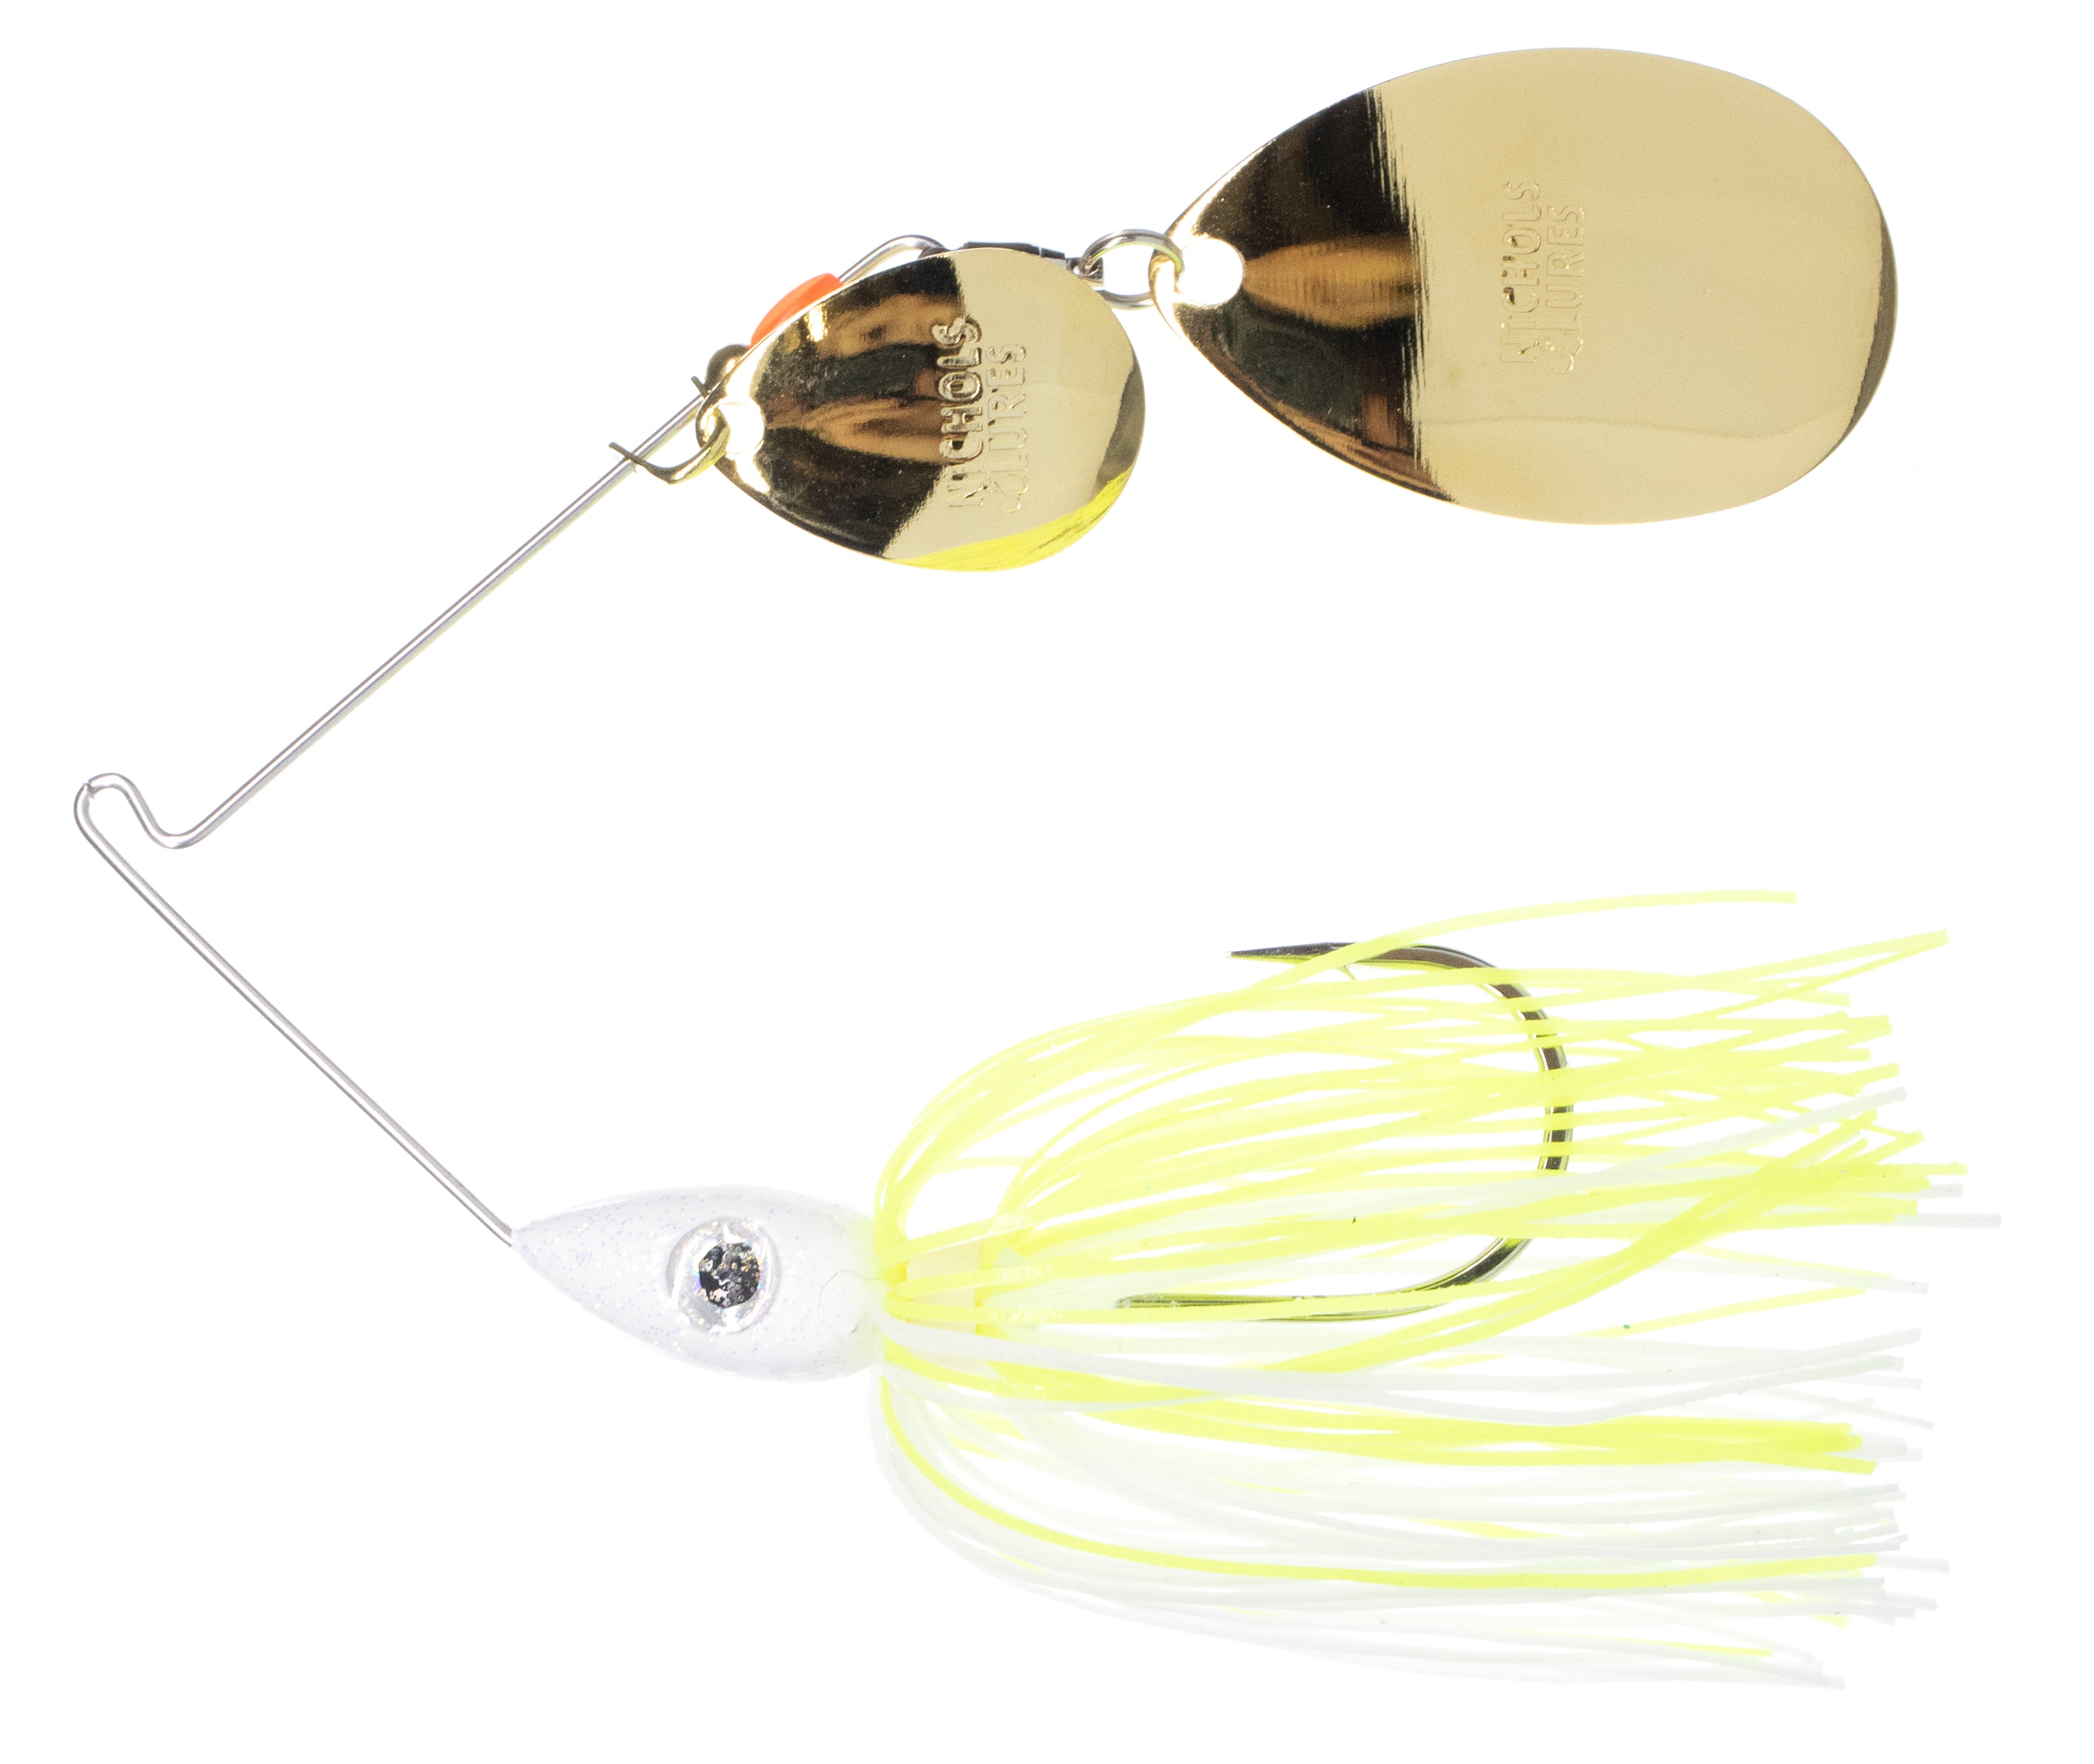 Nichols Elite Lo-Pro Spinnerbait Review - Wired2Fish